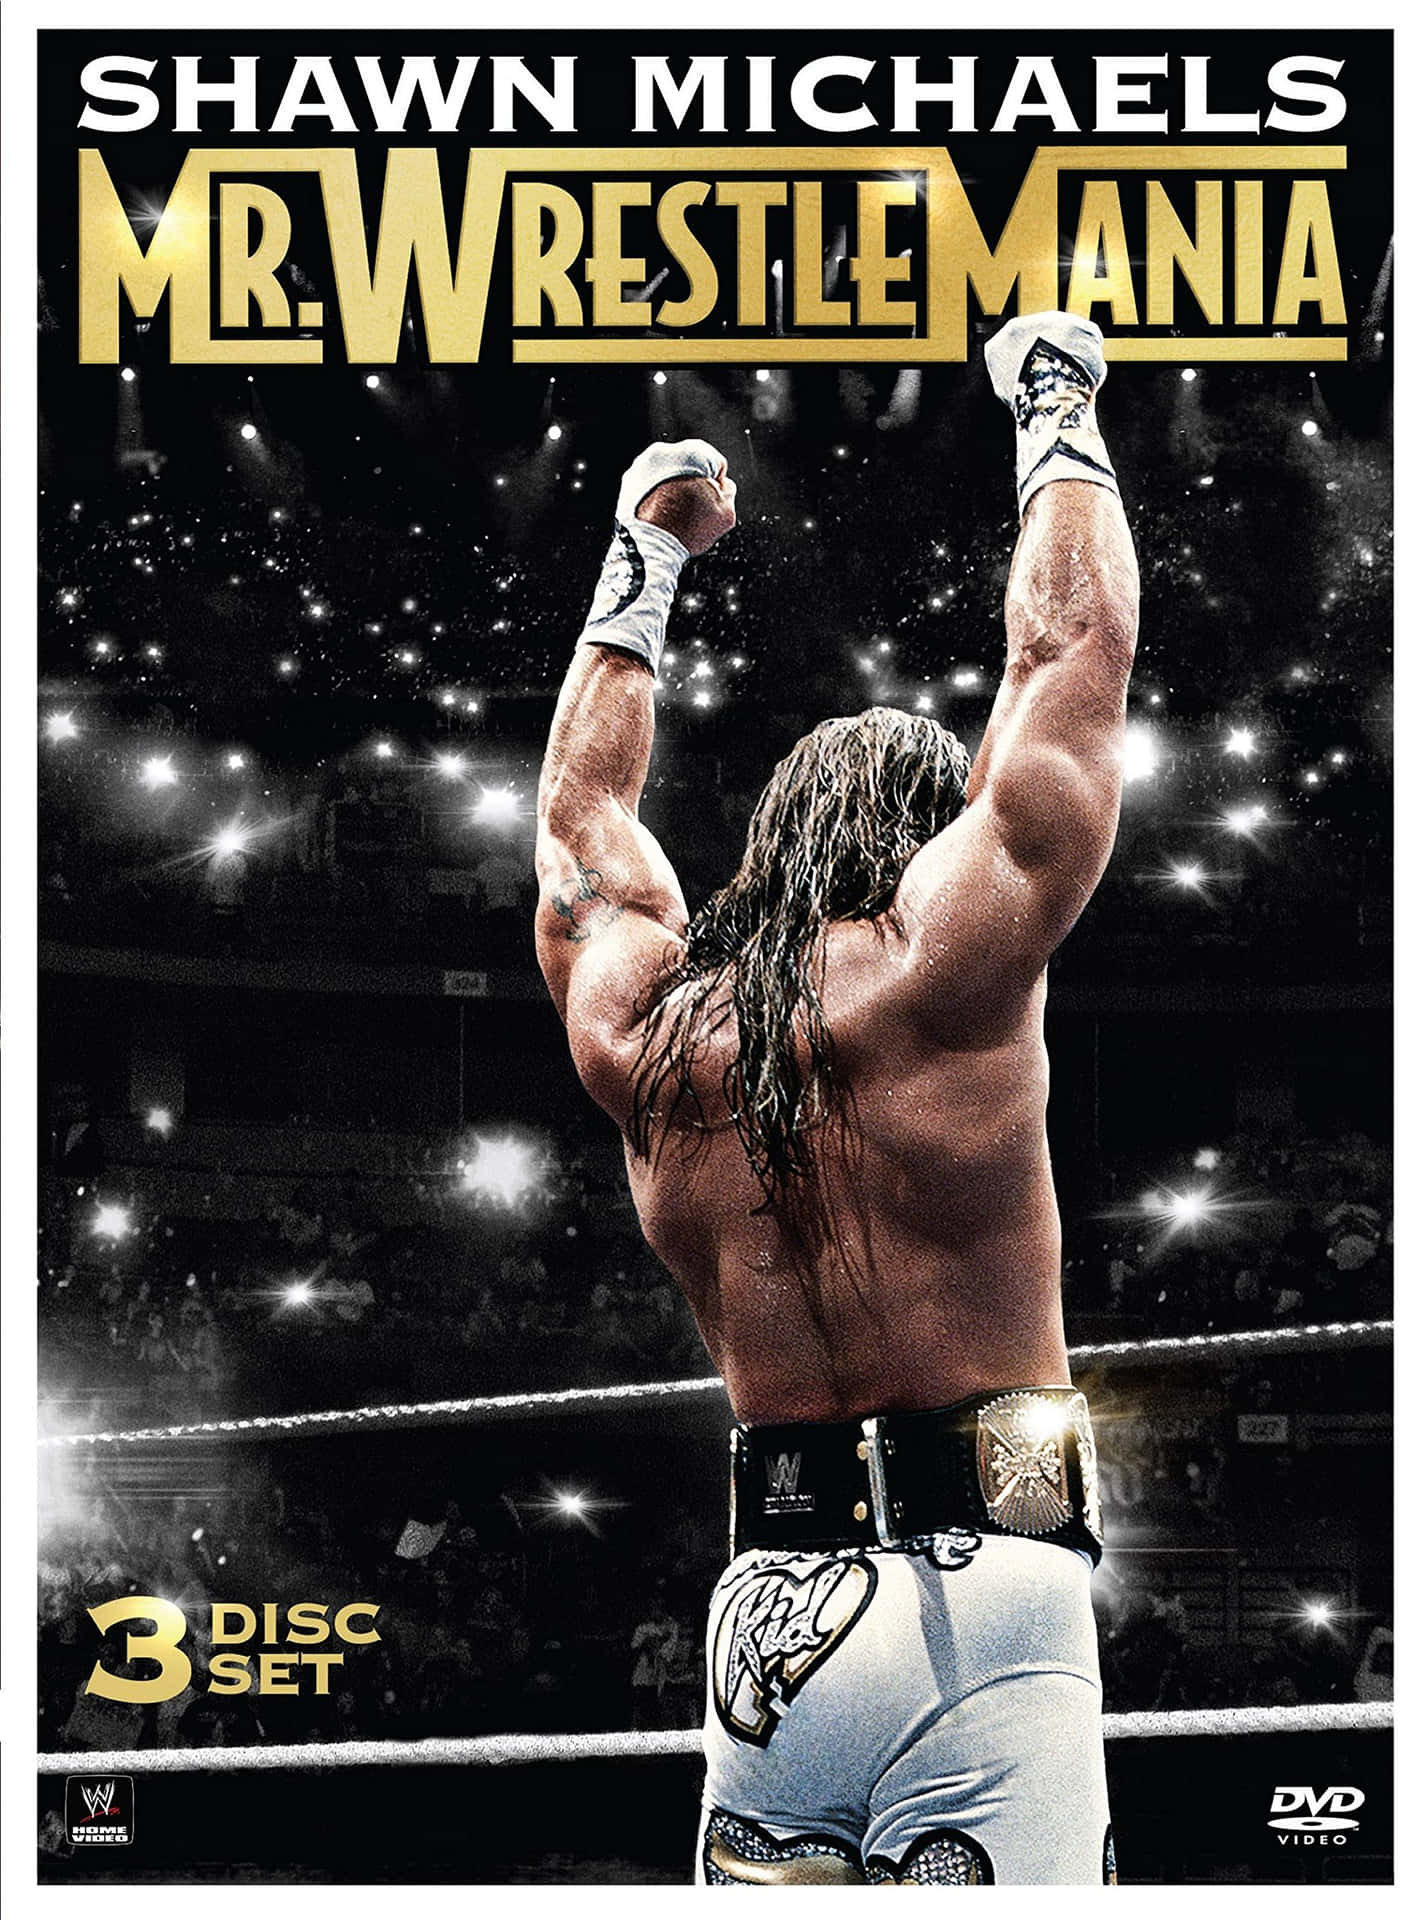 Legendary Wwe Star Shawn Michaels On Dvd Cover